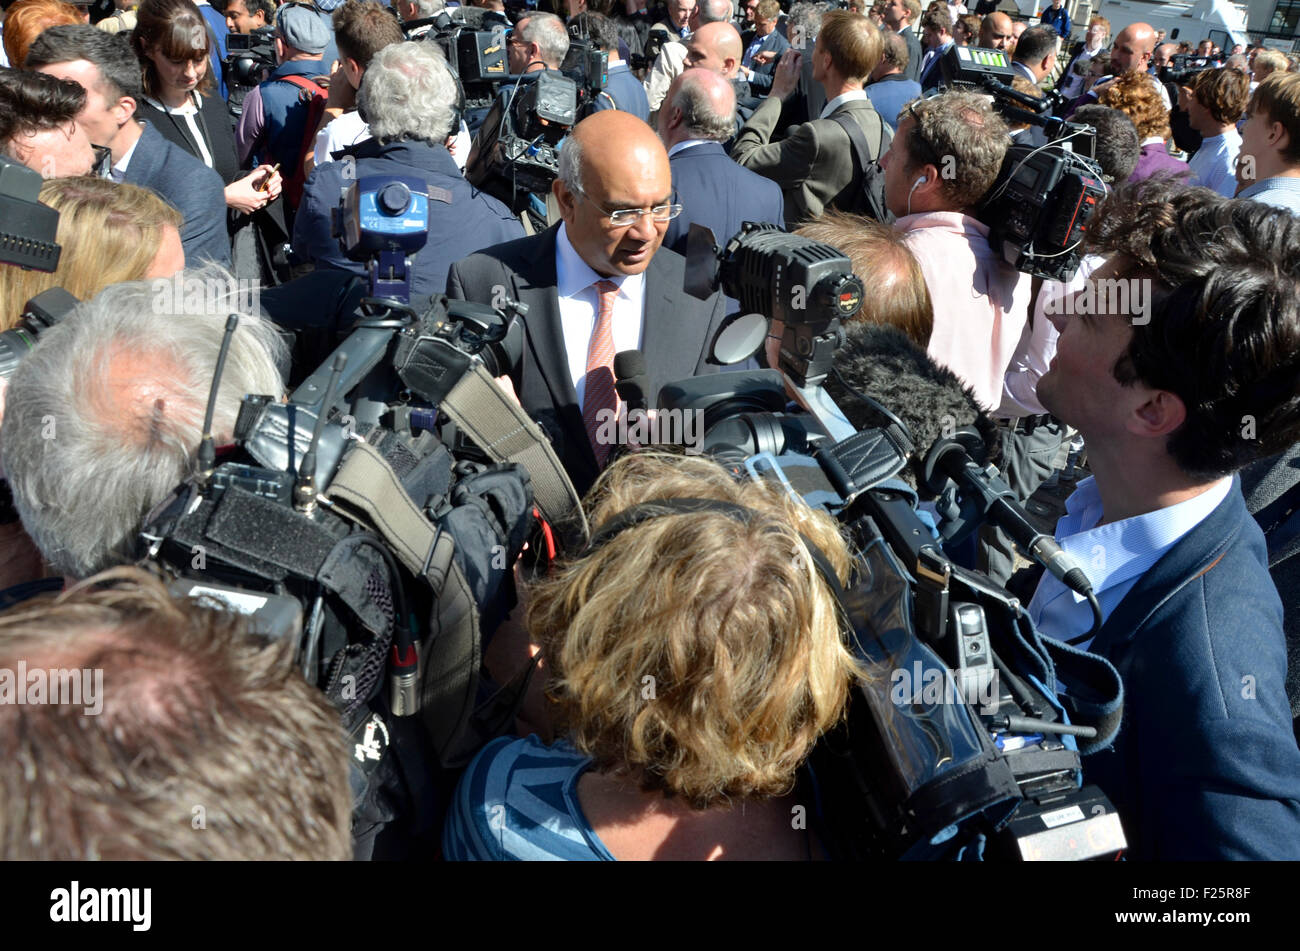 London, UK. 12th Sep, 2015. Crowds gather outside the Queen Elizabeth II Conference Centre in Westminster for the result of the labour party leadership Election. Keith Vaz being interviewed after the result Credit:  PjrNews/Alamy Live News Stock Photo